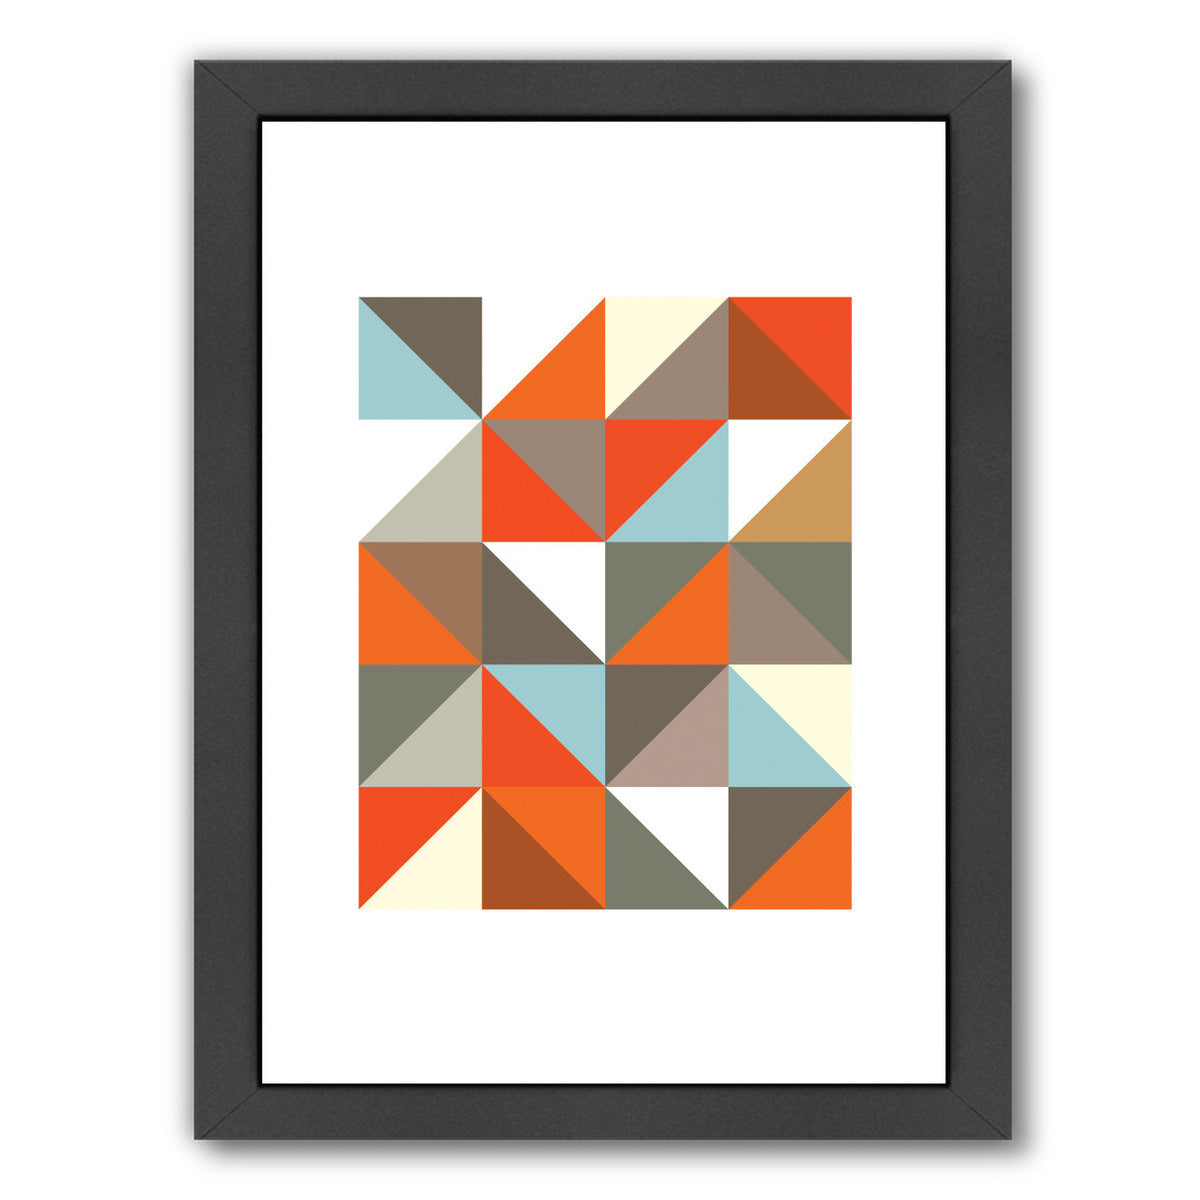 Harlequin 3 by Visual Philosophy Framed Print - Americanflat